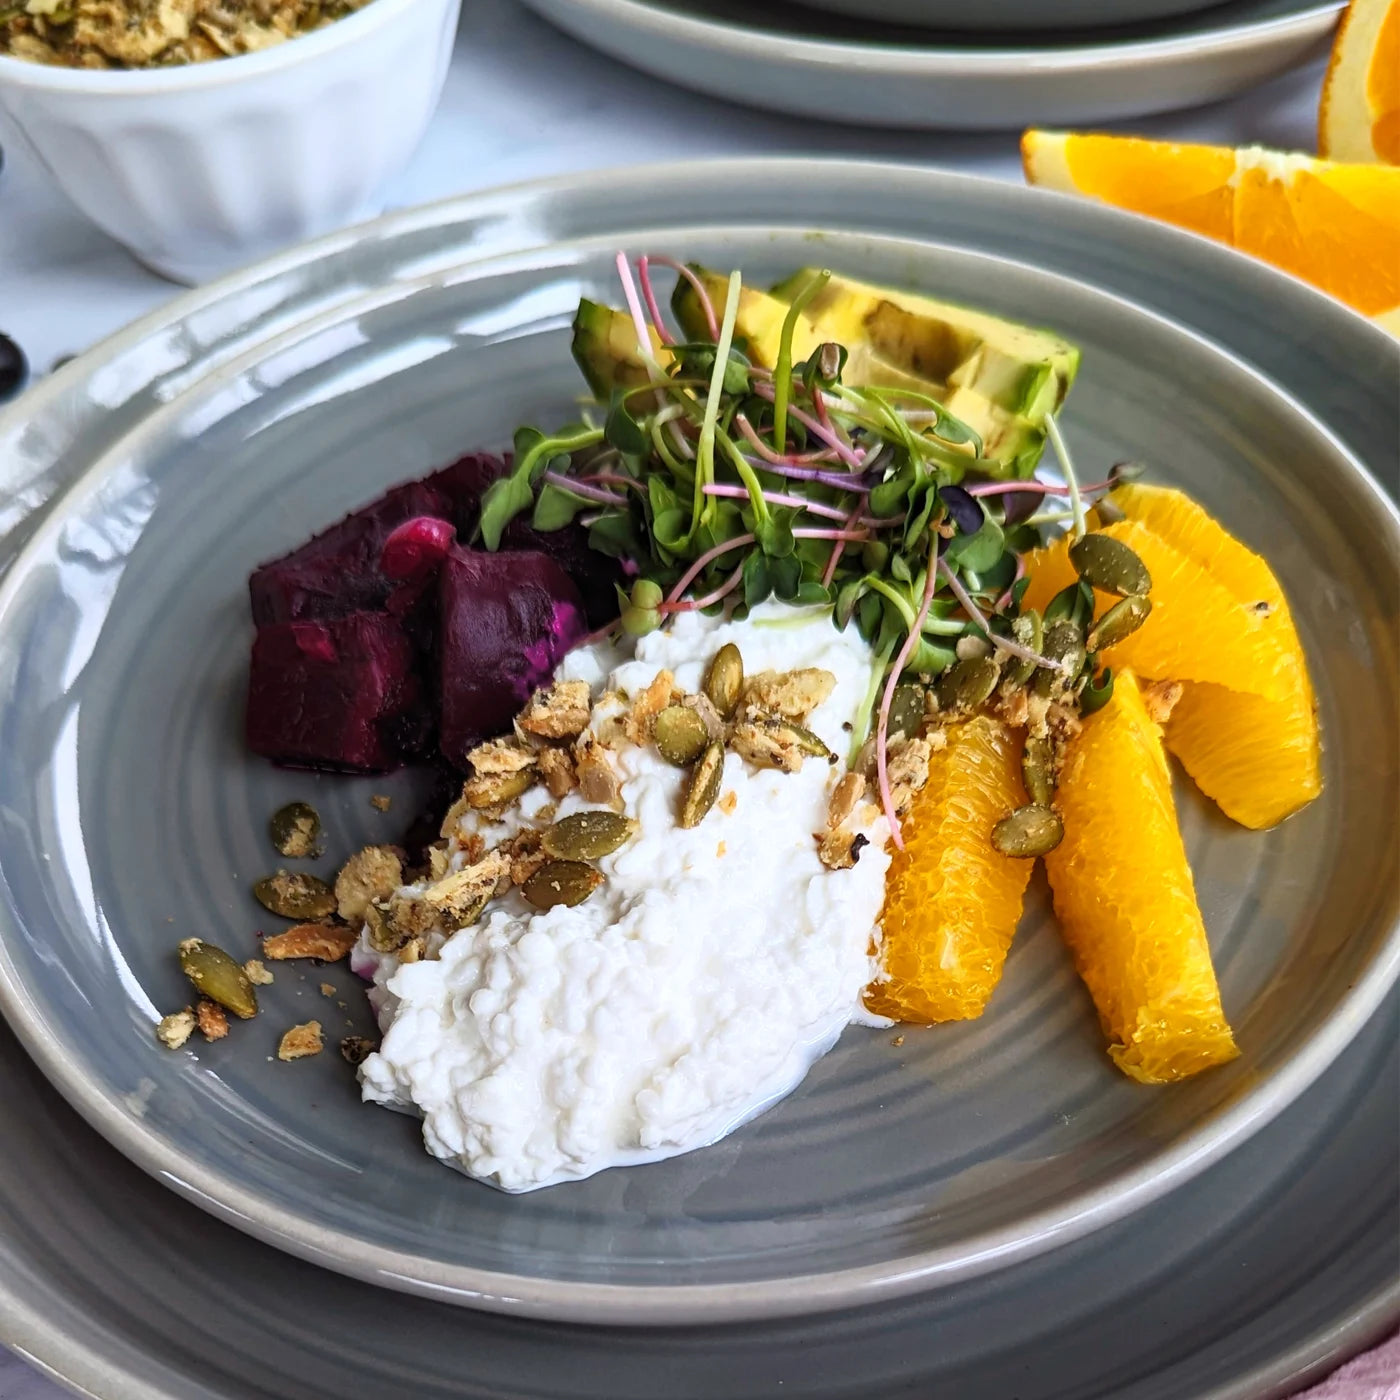 A plate of cottage cheese topped with micro greens, fruit and Struesli's organic granola.